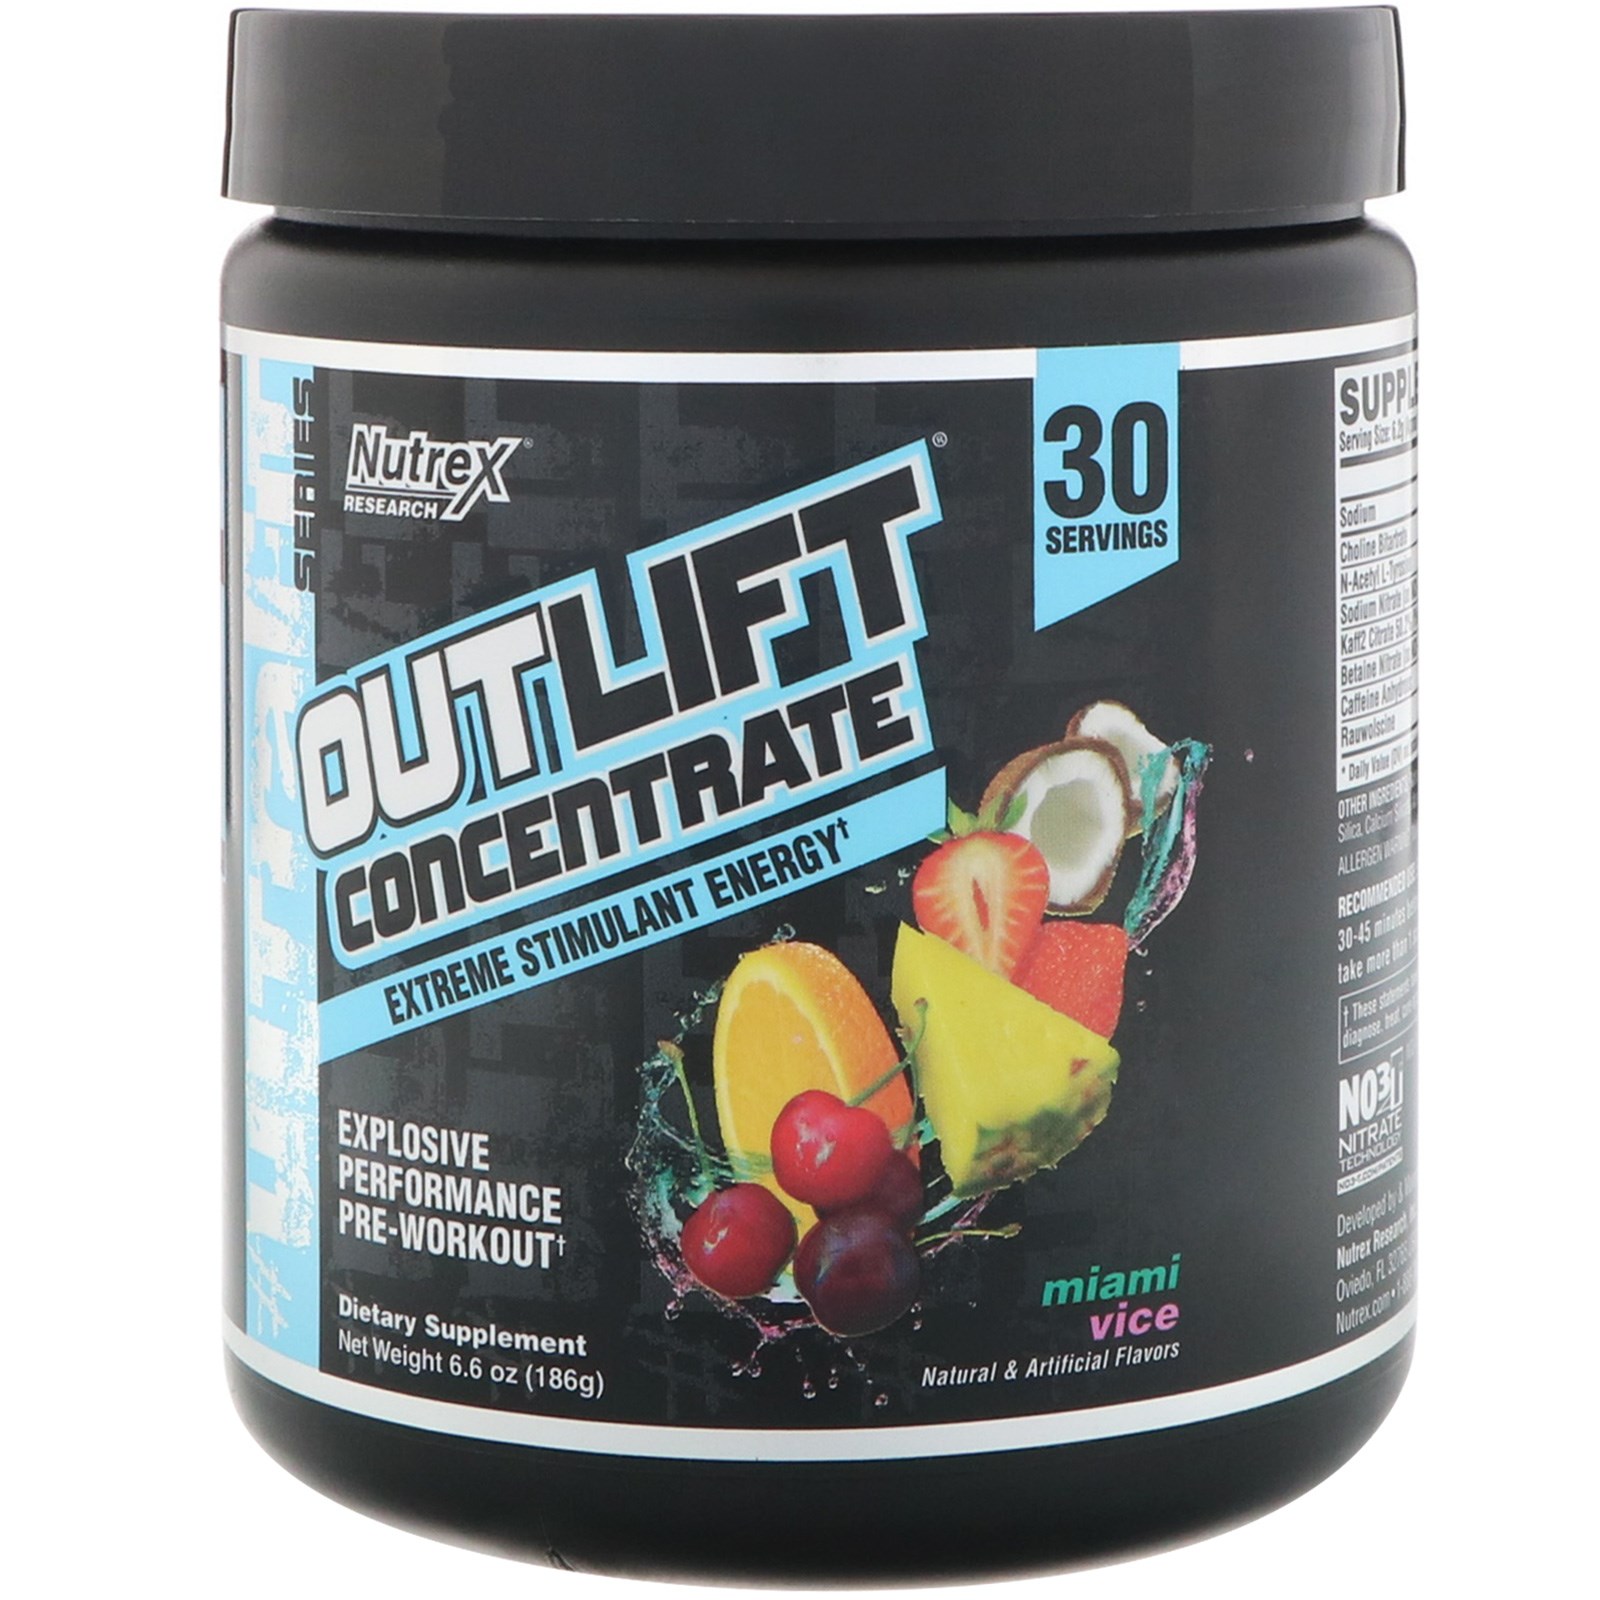 Simple Outlift Concentrate Pre Workout for Burn Fat fast